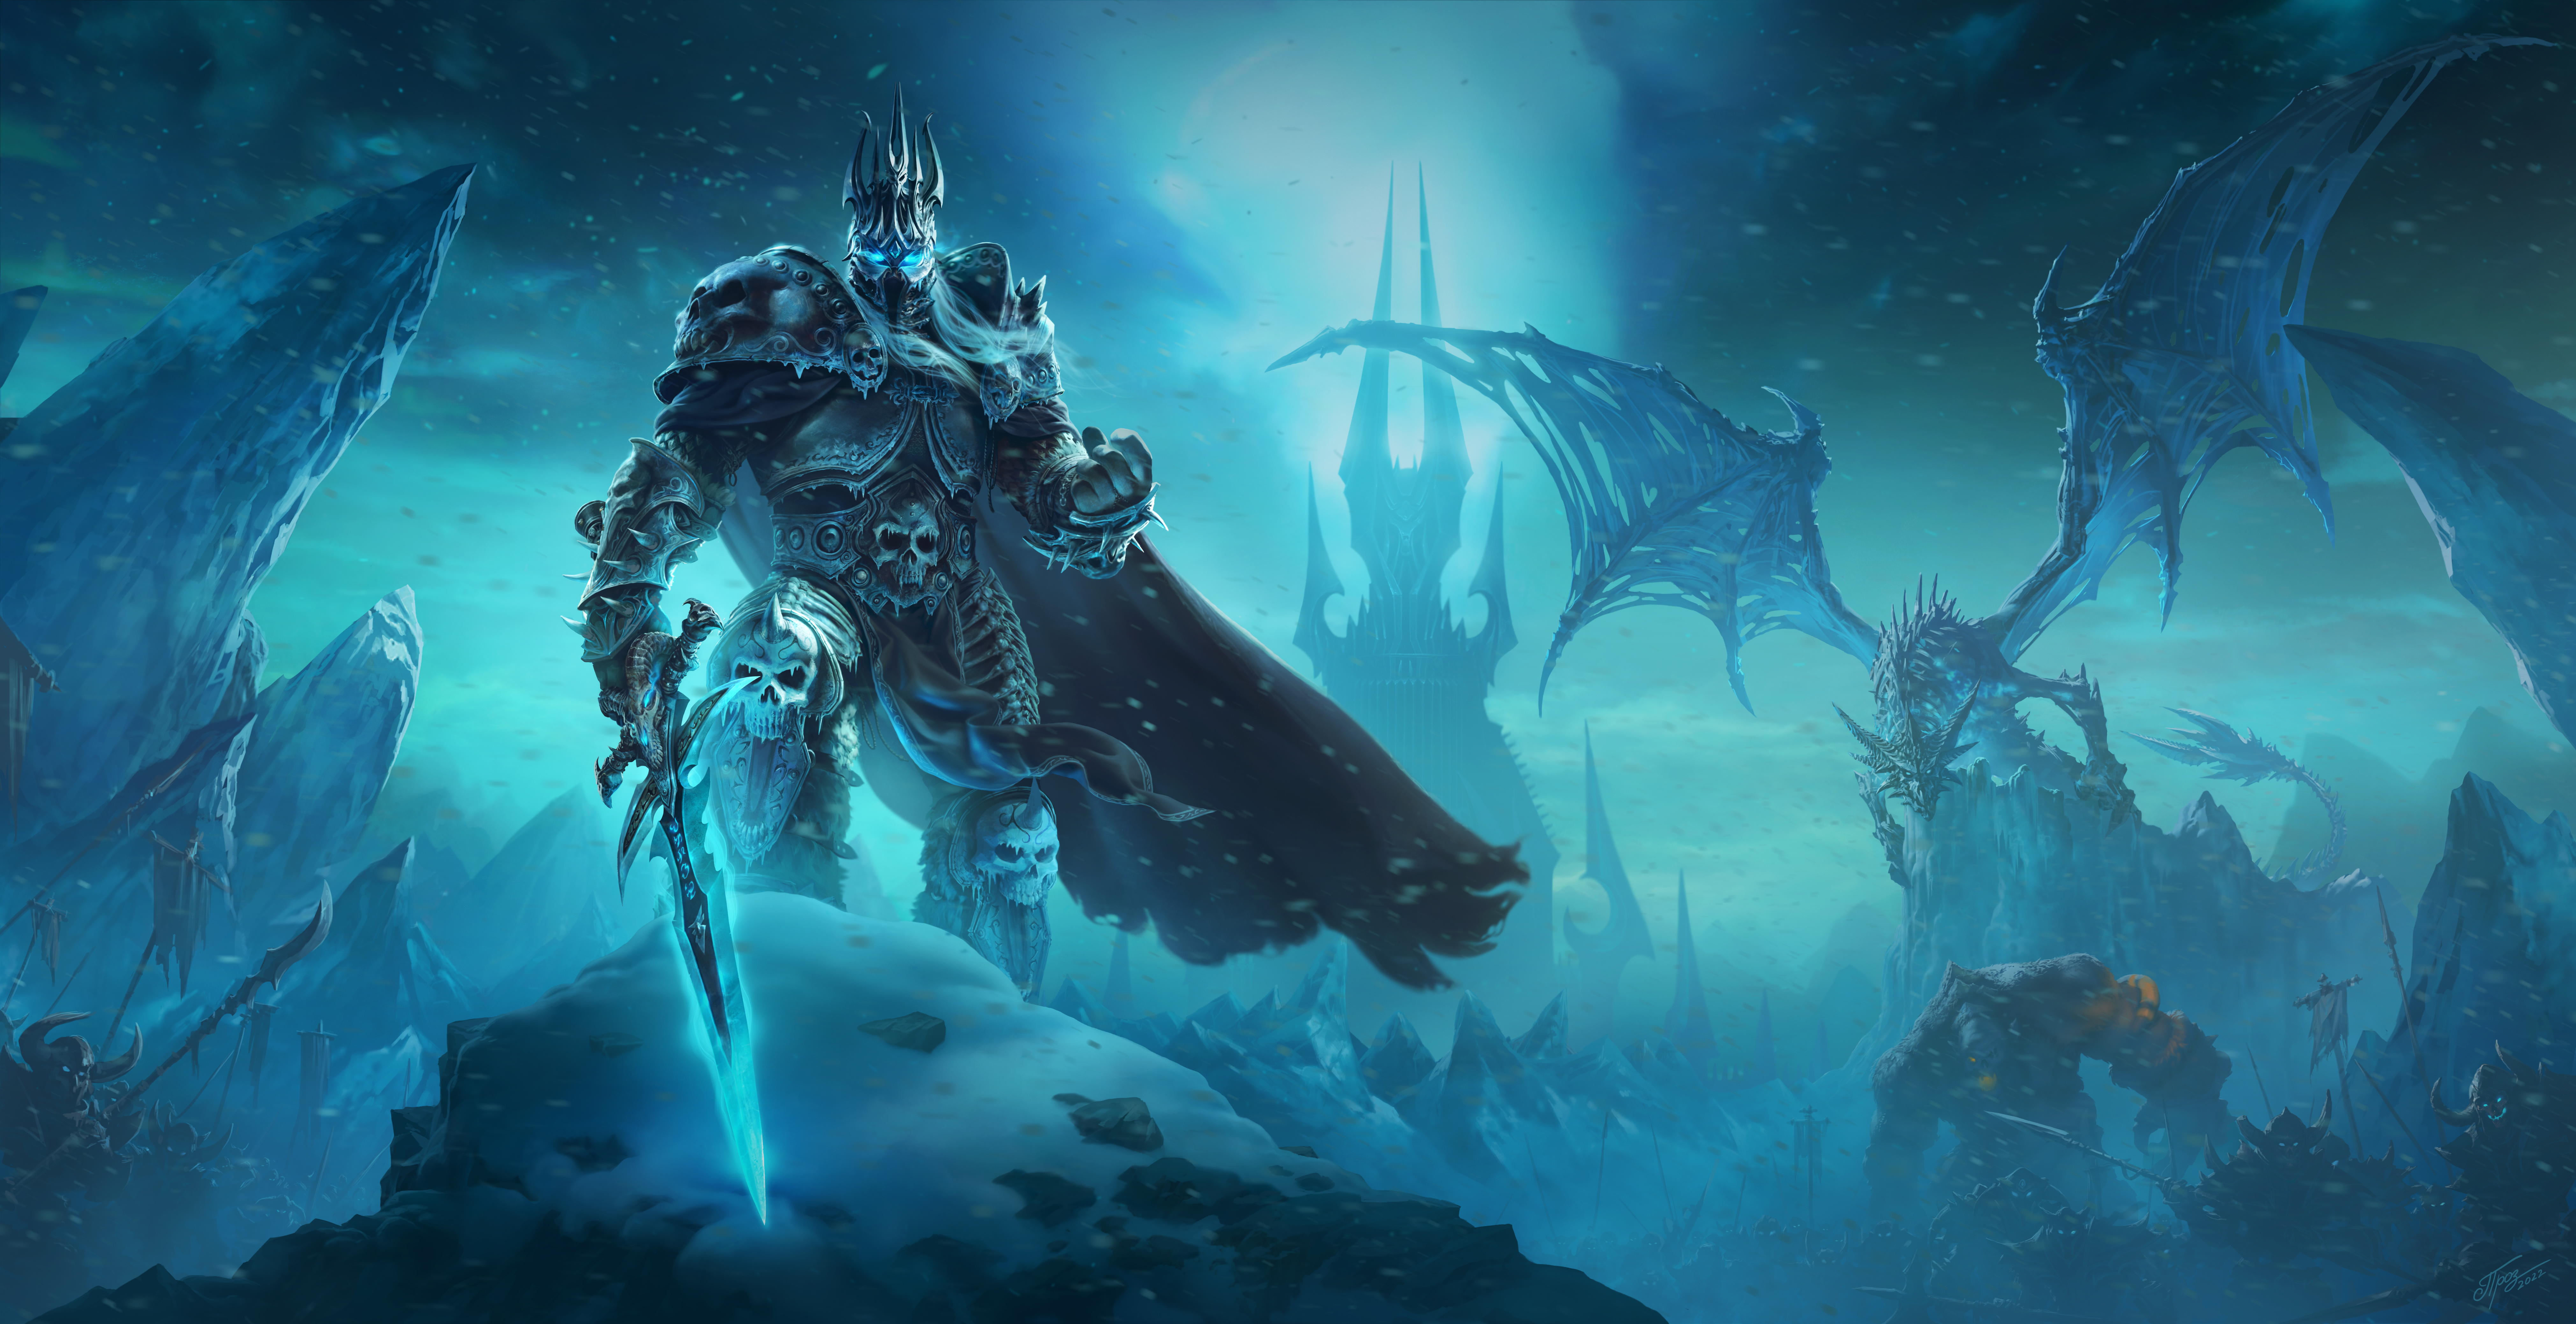 Arthas stands on a mountain and looks at the camera in the key art for Wrath of the Lich King classic